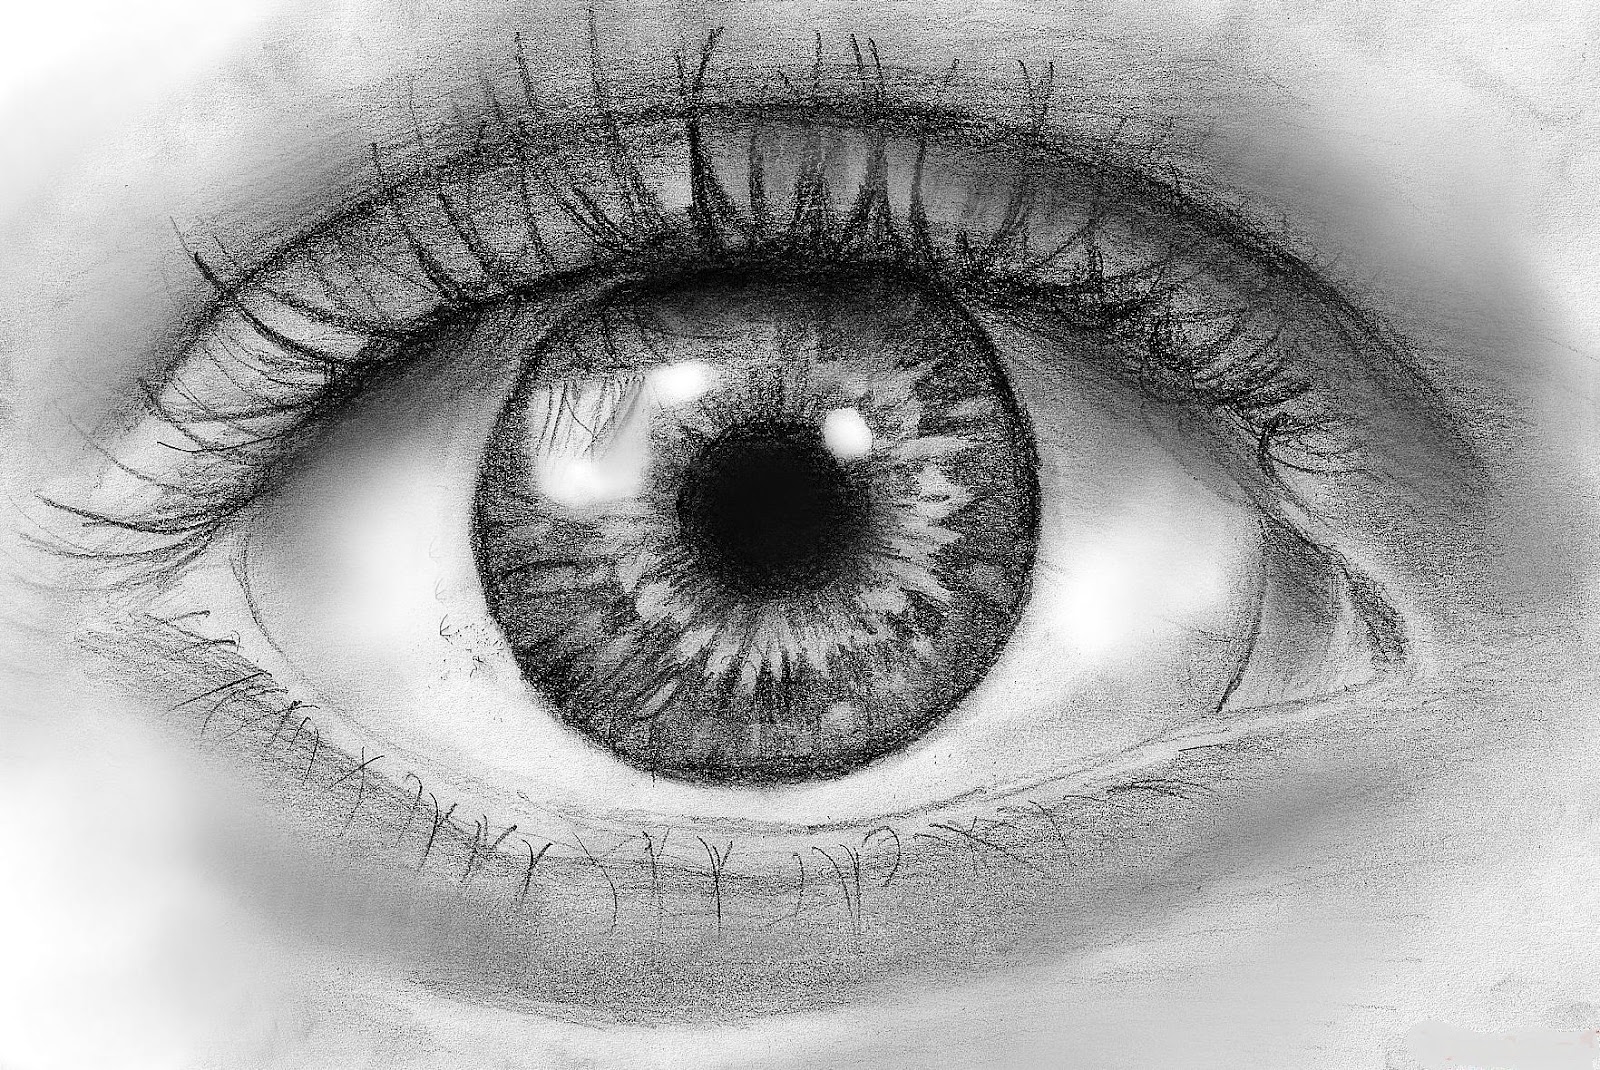 How To Draw How To Draw An Eye In Pencil 27920 | The Best Porn Website